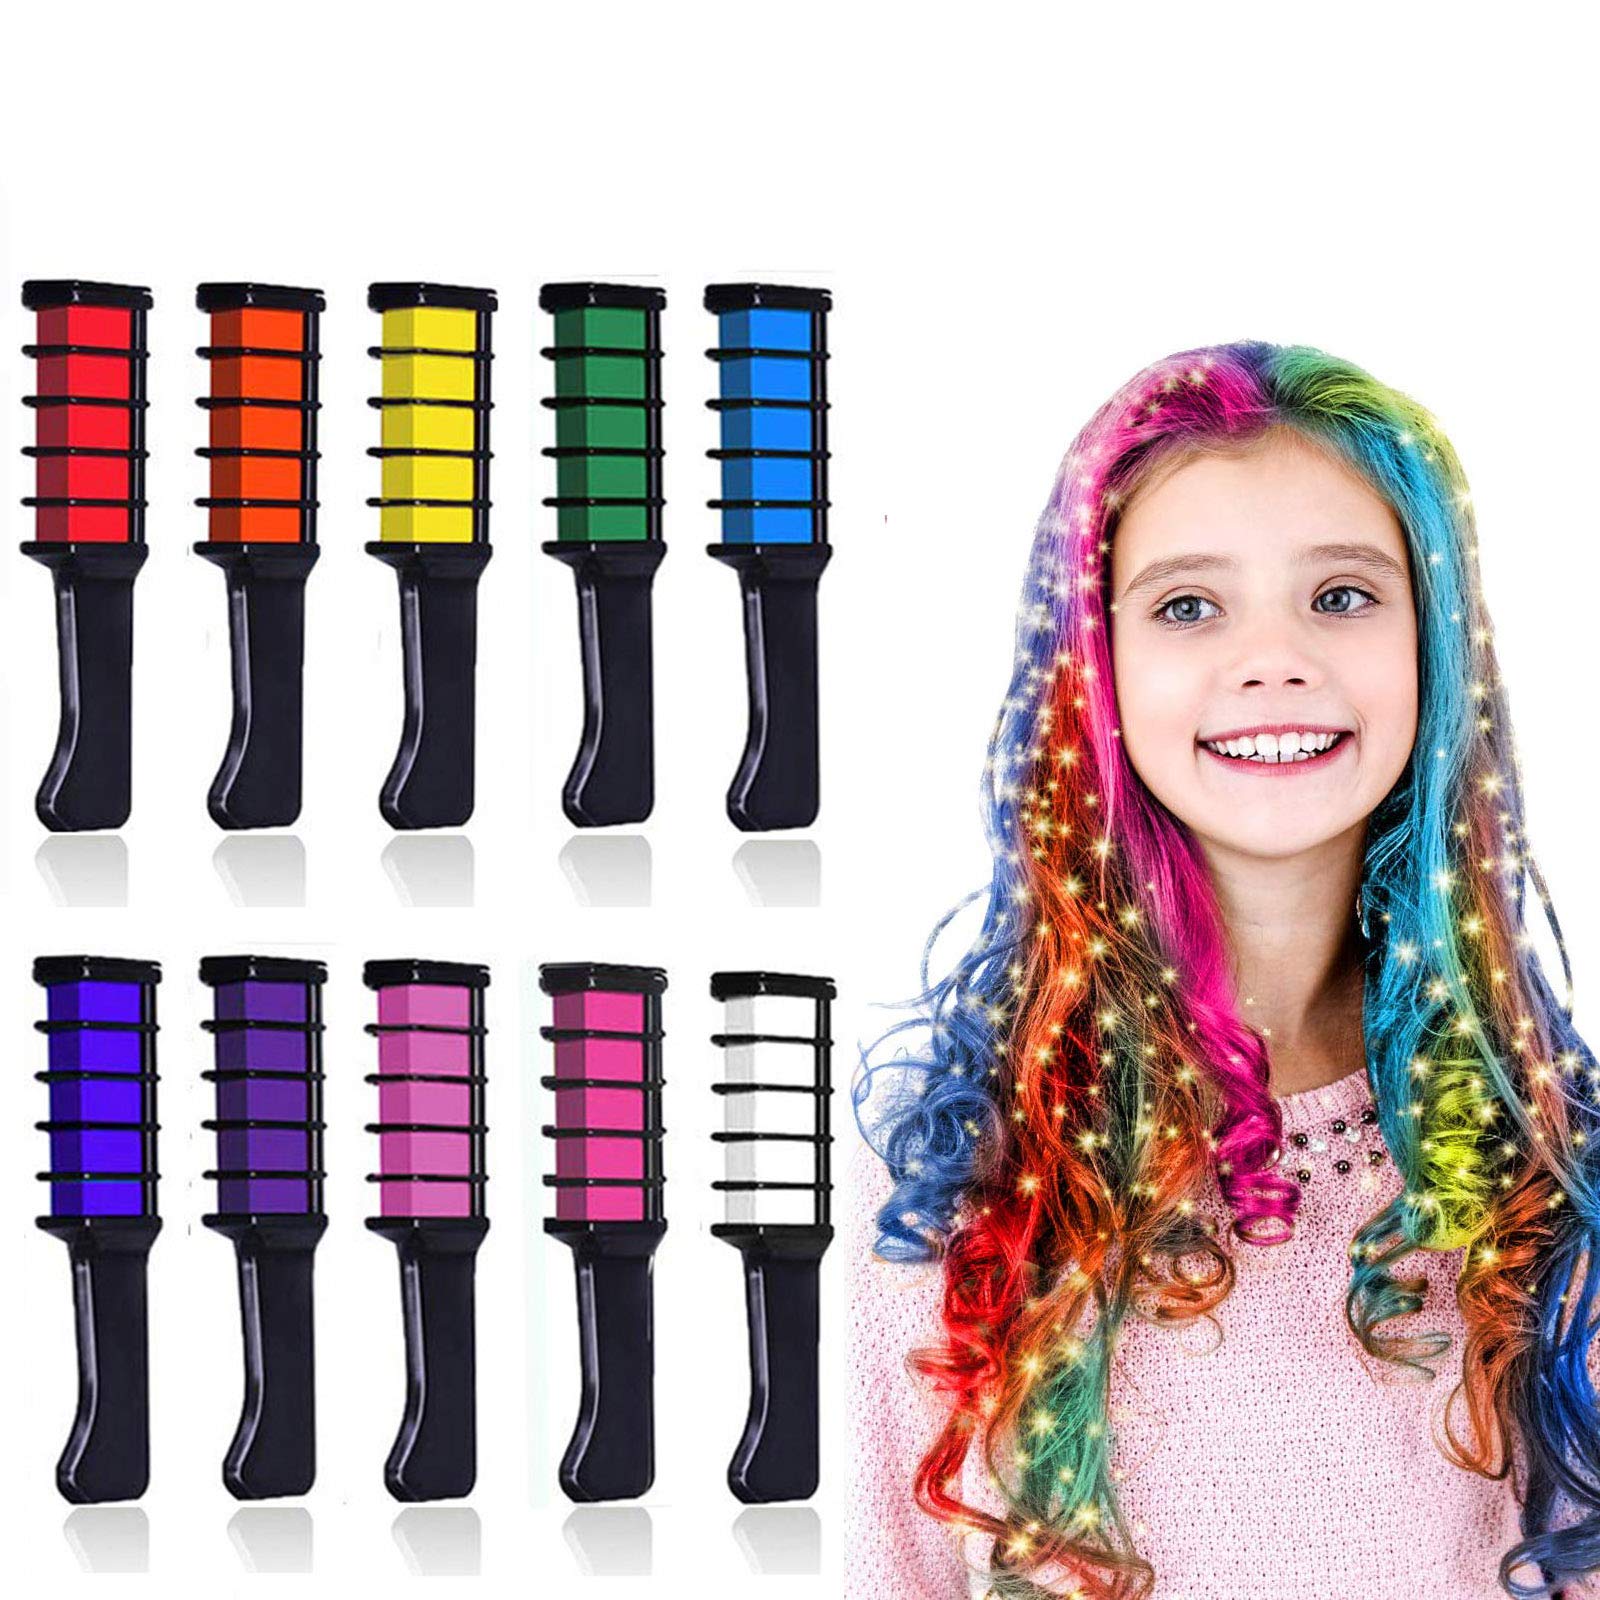 Kalolary 10 Colors Hair Chalk for Girls Kids, Temporary Bright Hair Color  Dye for Girls Age 4 5 6 7 8 9 10+, Washable Hair Chalk Comb for Halloween  Christmas Party Cosplay DIY